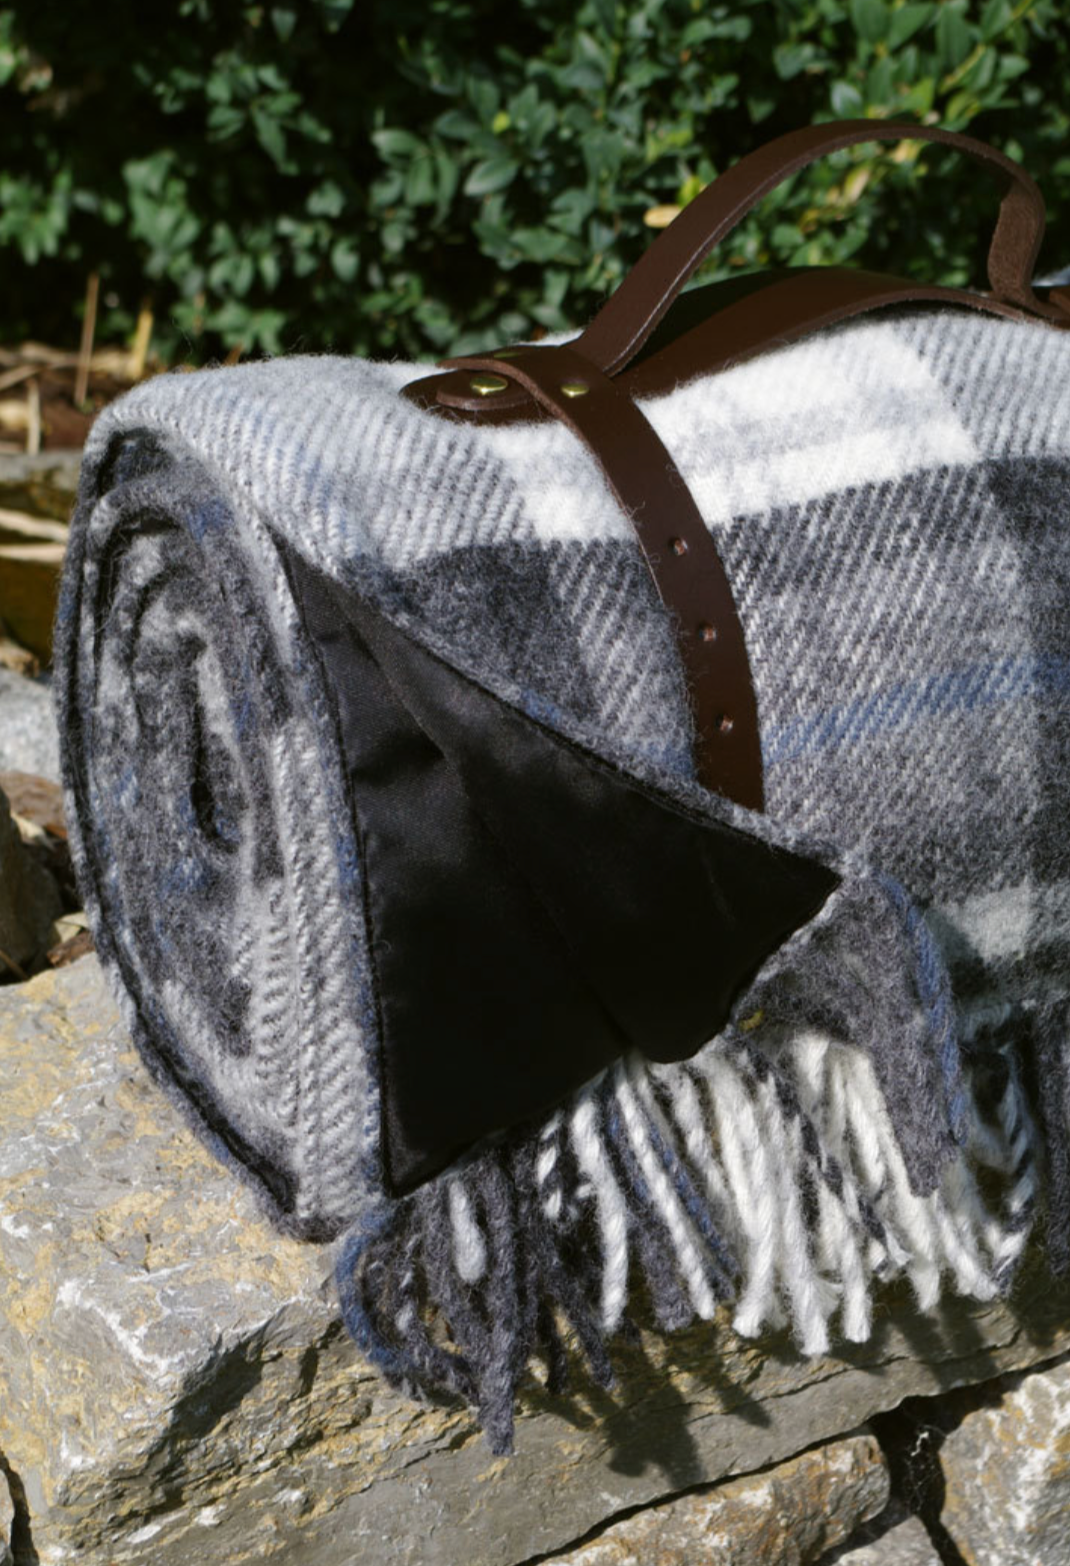 Tweedmill Polo Pure Wool Knitted Picnic Blanket, Cottage Grey